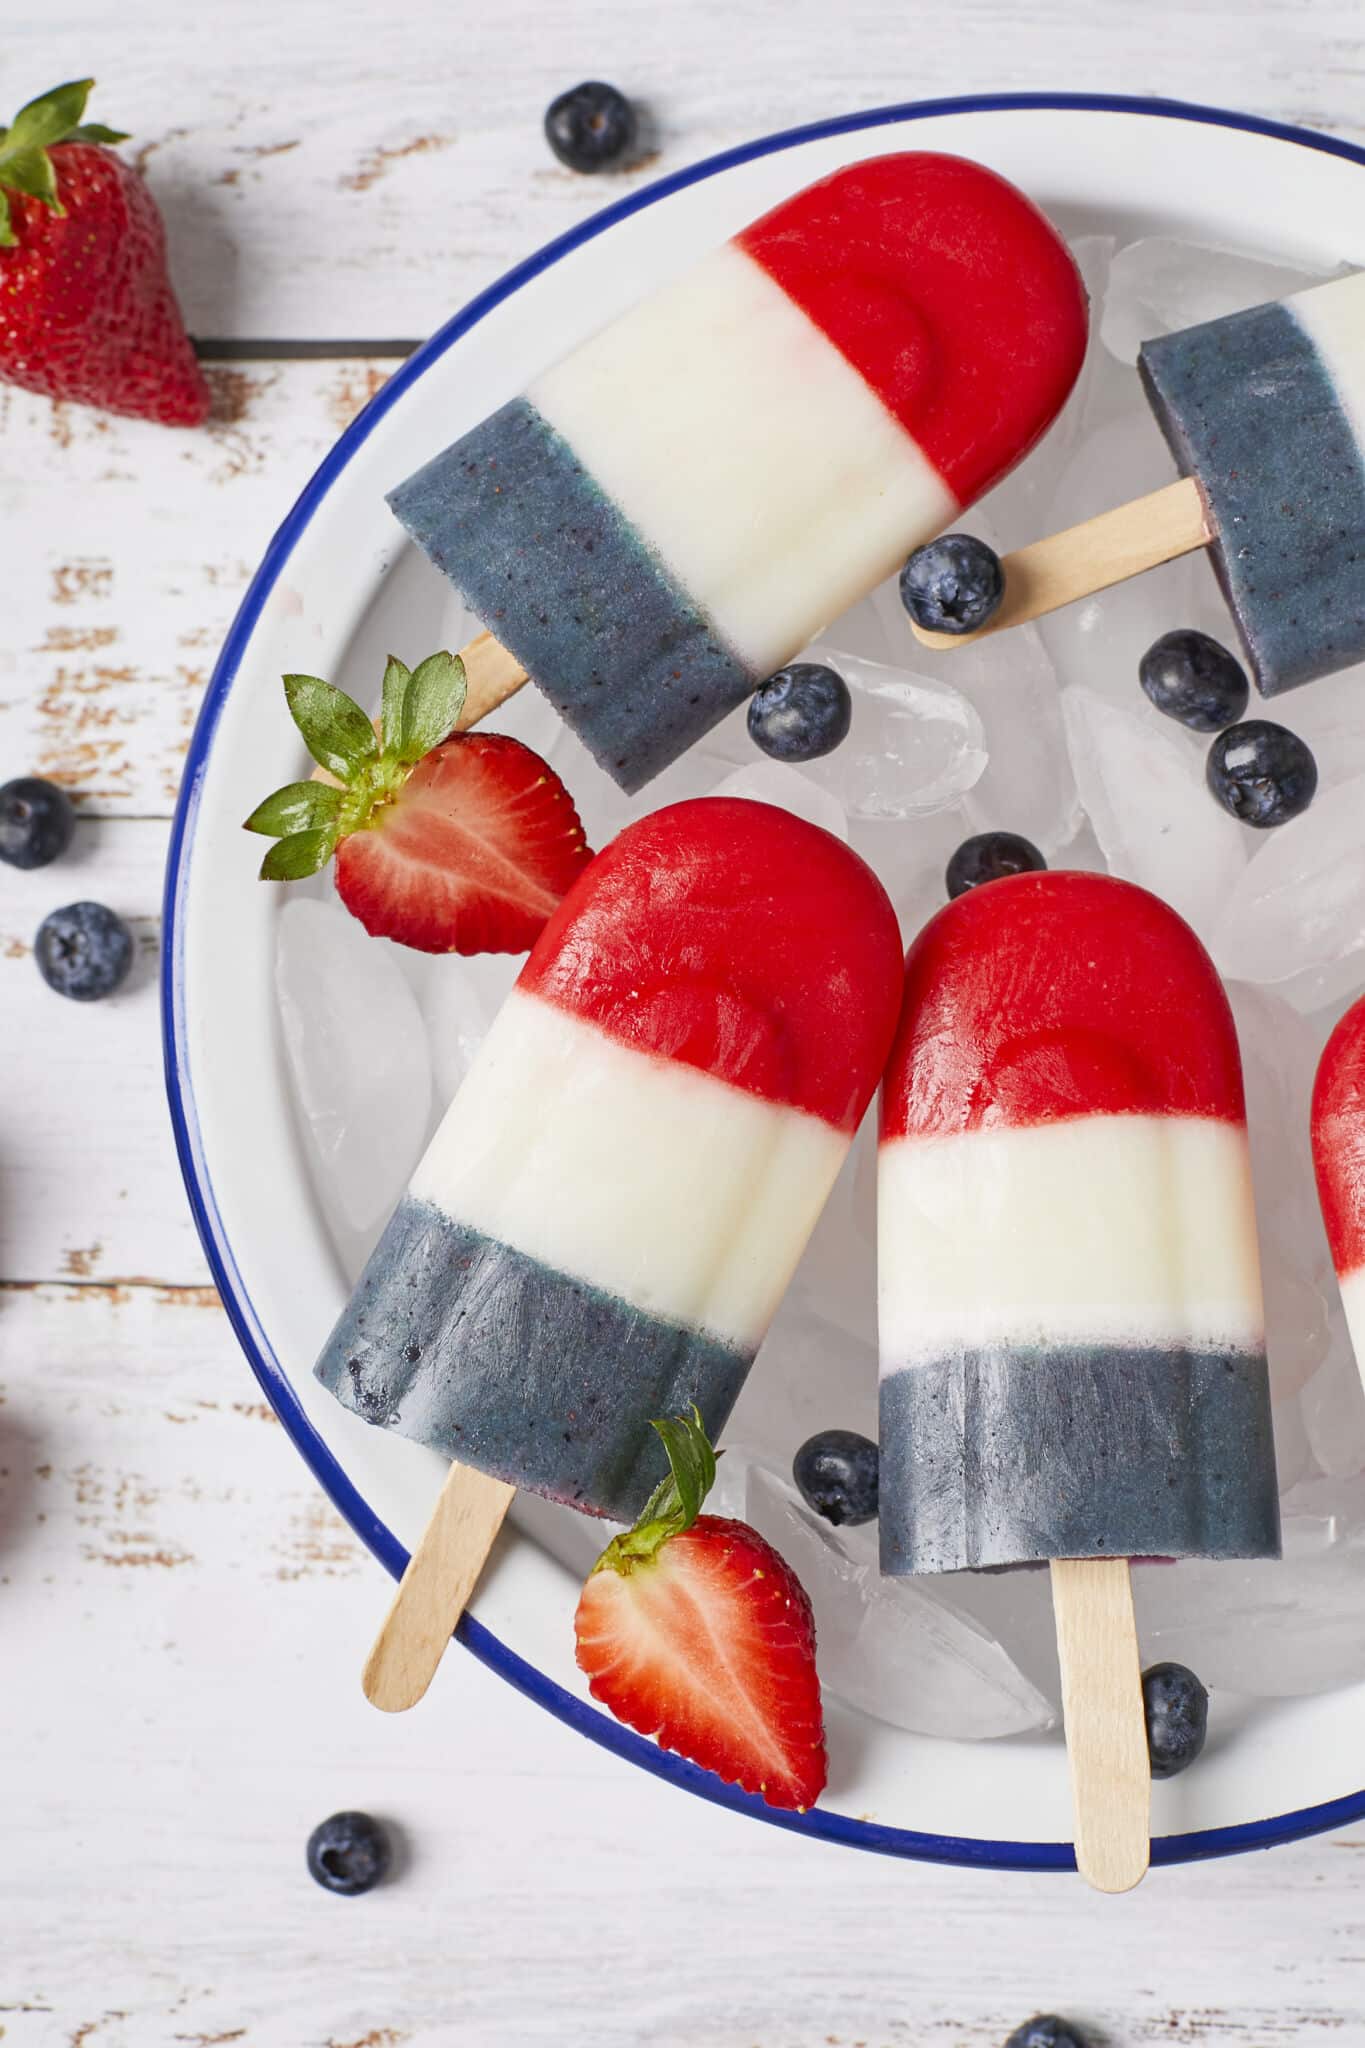 Homemade Bomb Pop Popsicles with vibrant red, white and blue colors, served on a round blue-edged white enamel platter with ice cubes and fresh blueberries. More fresh blueberries and one strawberry are on the side around the platter. 